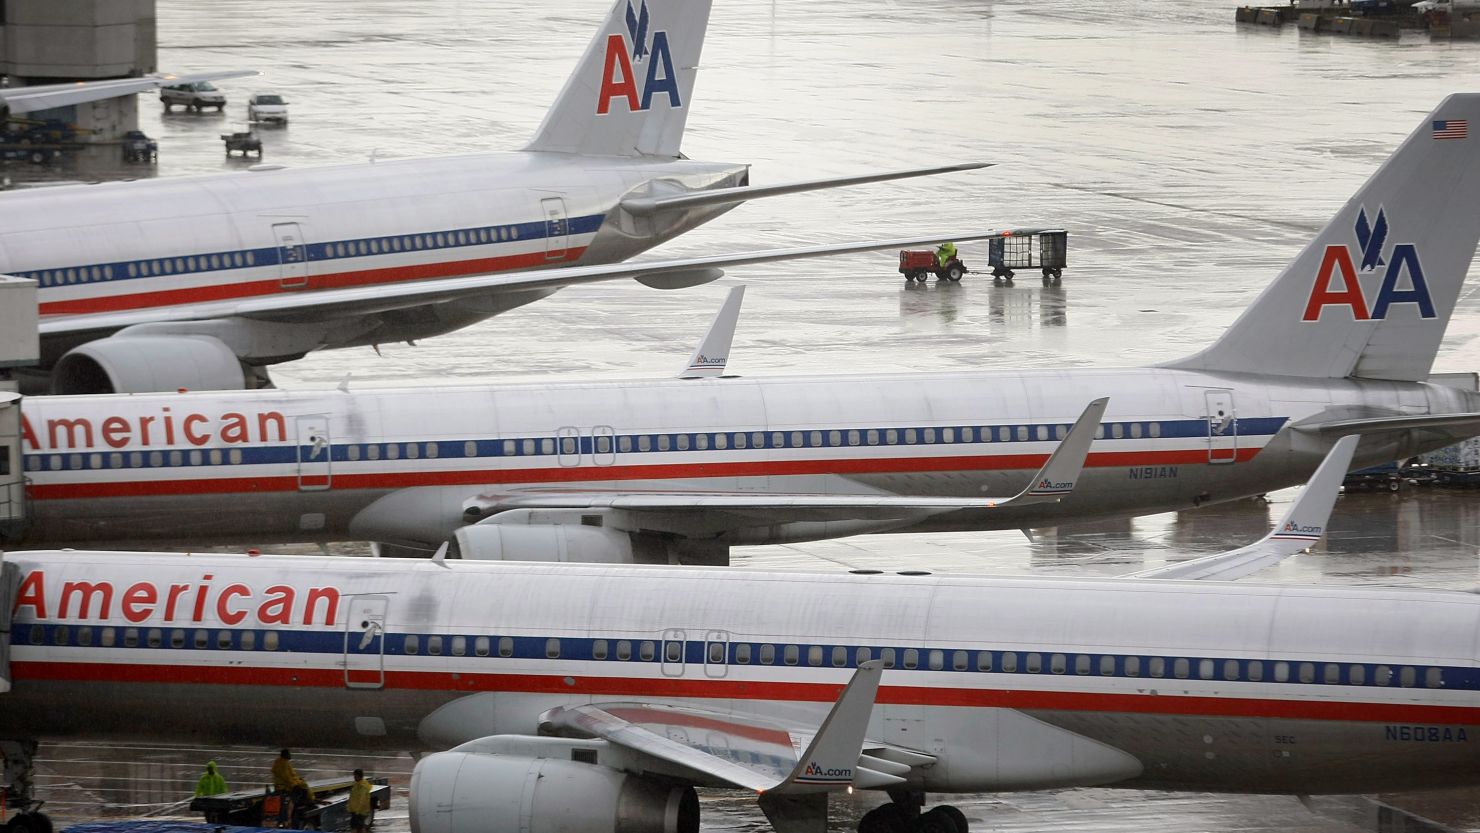 American Airlines was plagued by labor disputes and maintenance problems in September.